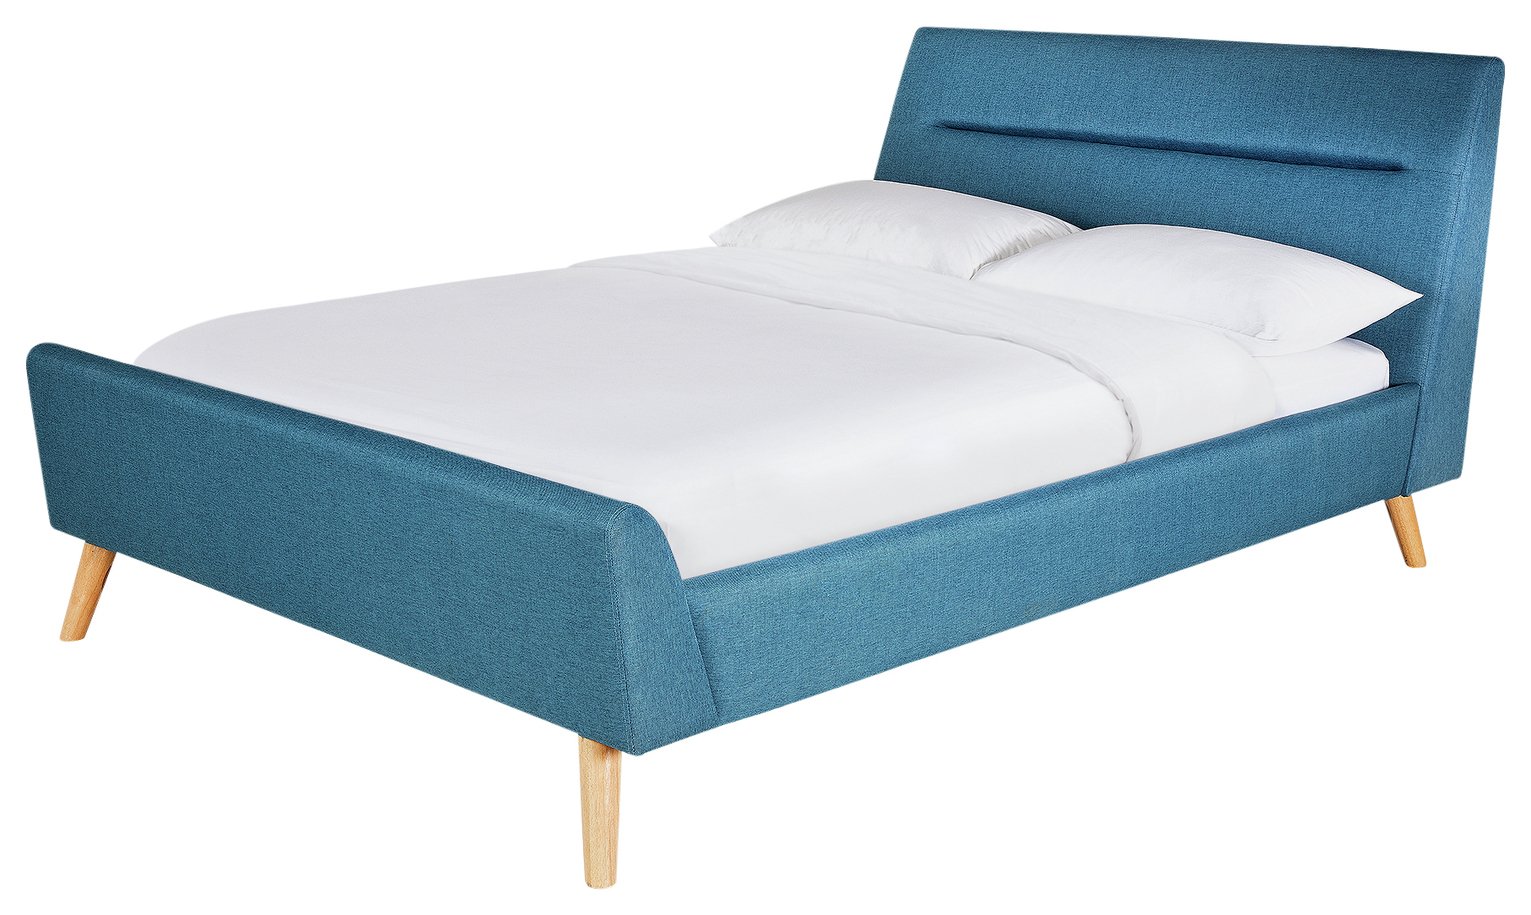 Argos Home Finn Teal Small Double Bed Frame review